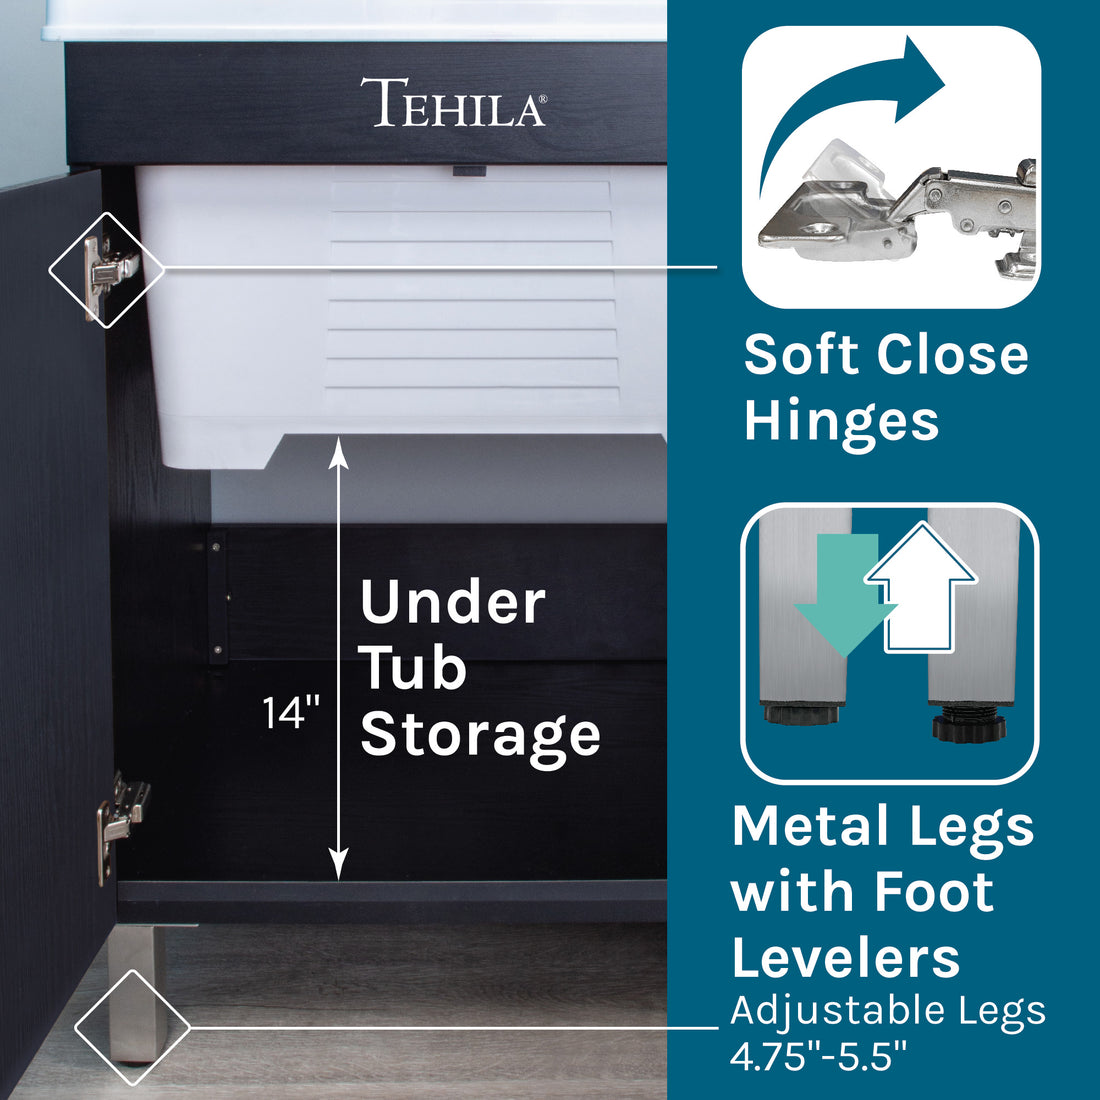 Tehila Under the Tub Storage with Soft Close Hinges and Metal legs with foot levelers